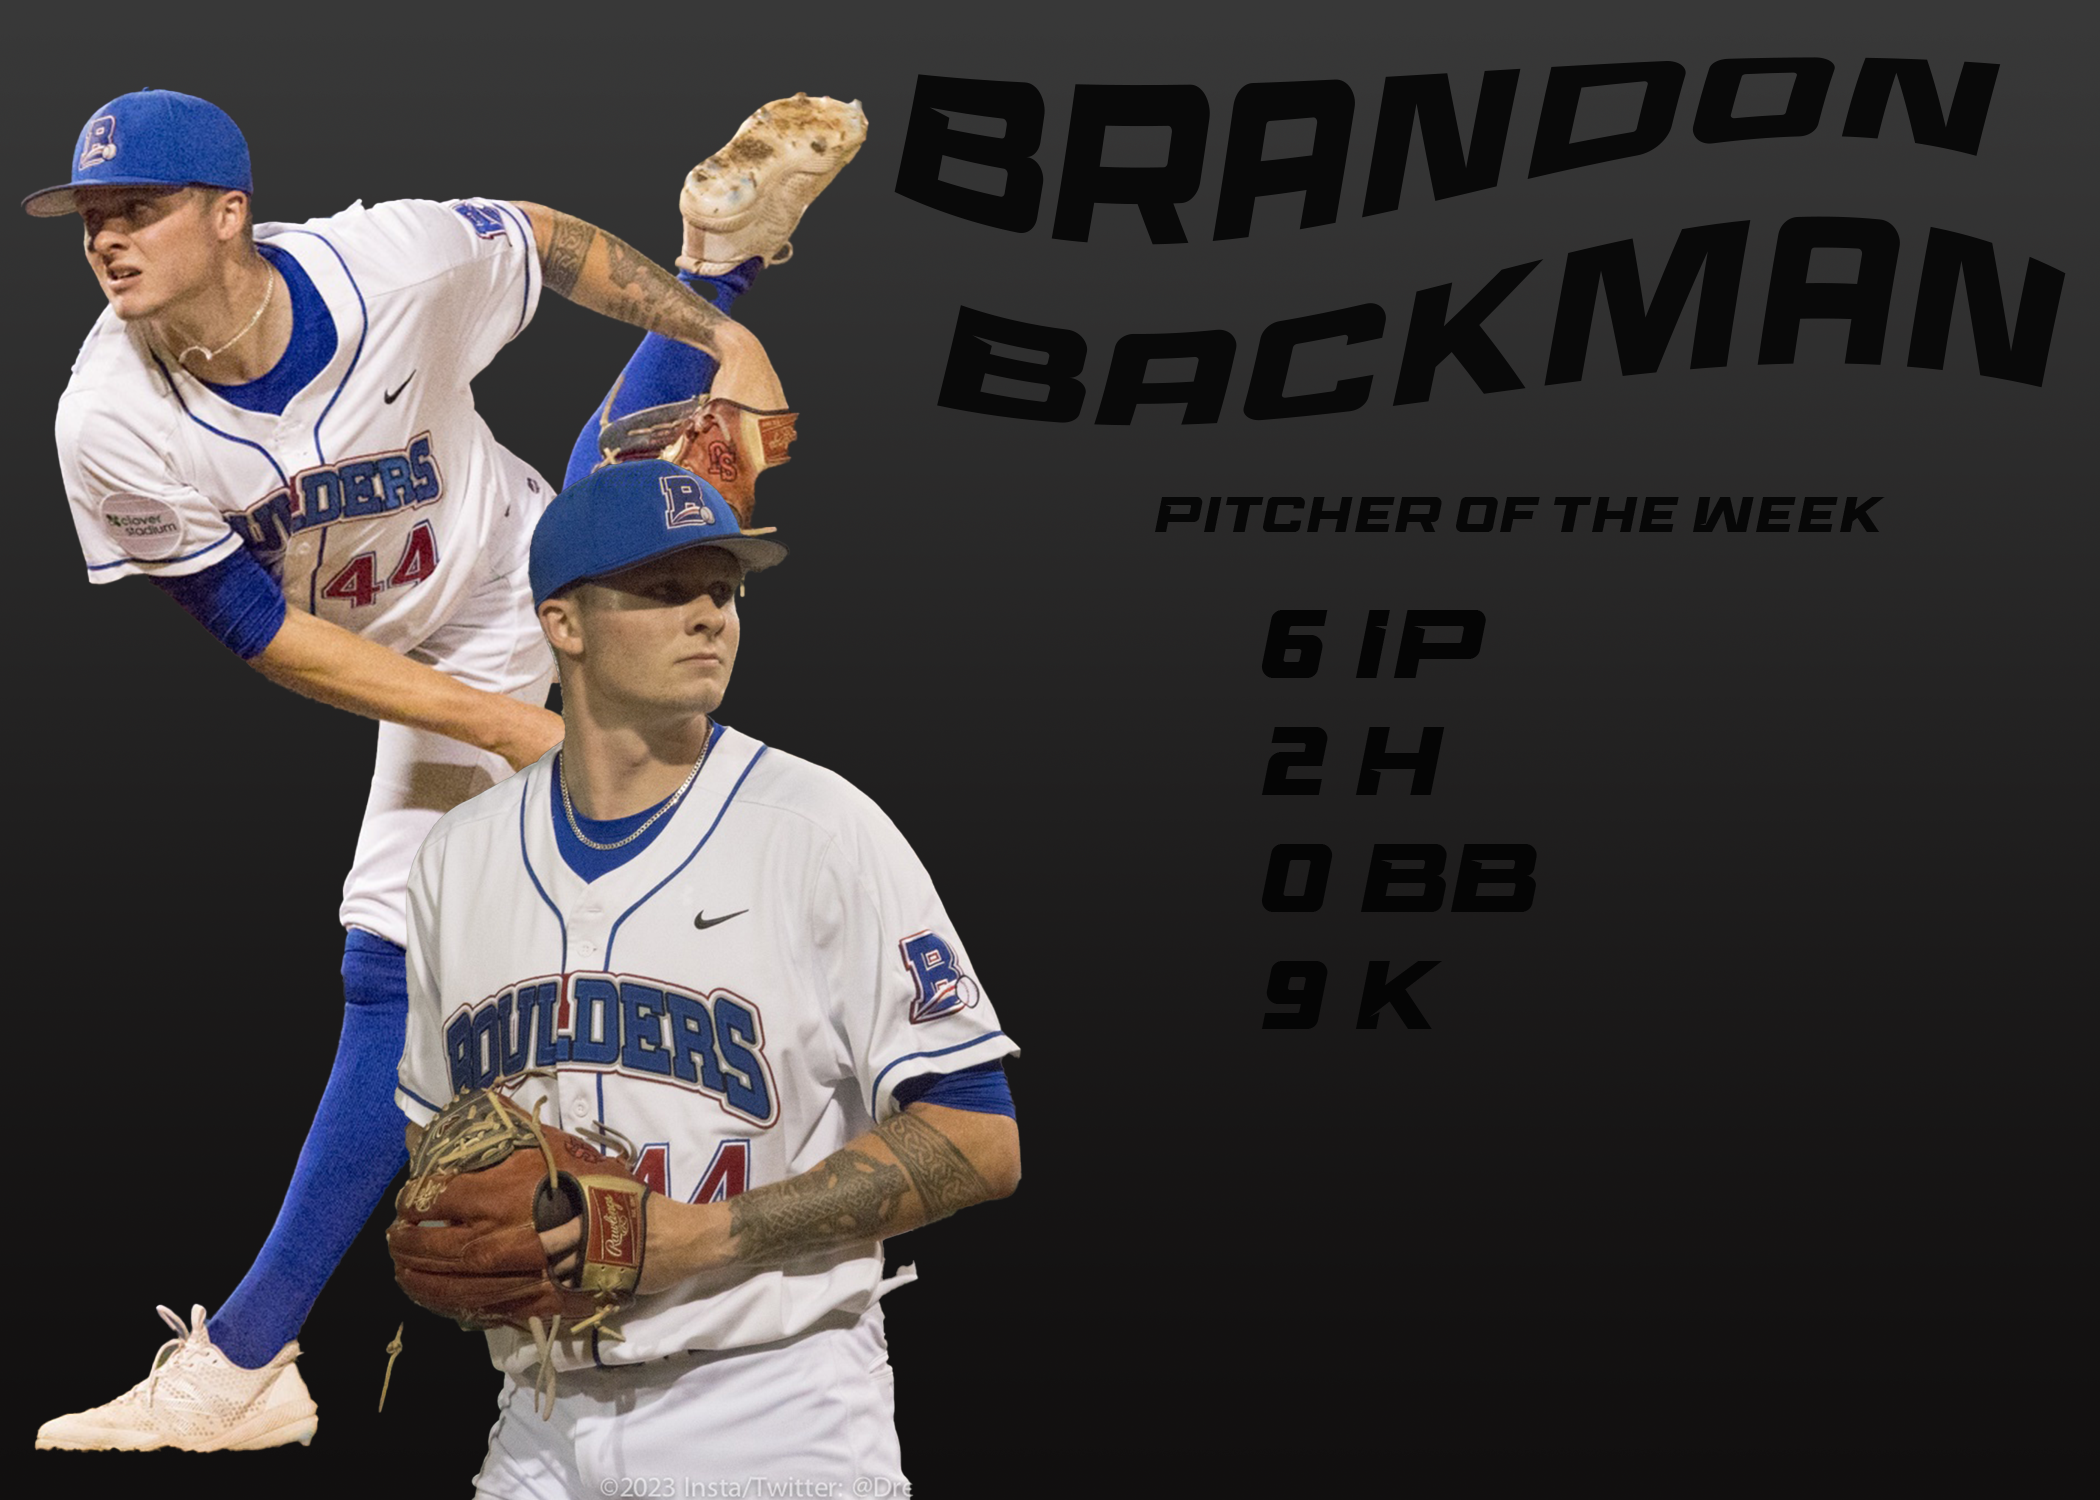 BRANDON BACKMAN OF THE NEW YORK BOULDERS WINS PITCHER OF THE WEEK